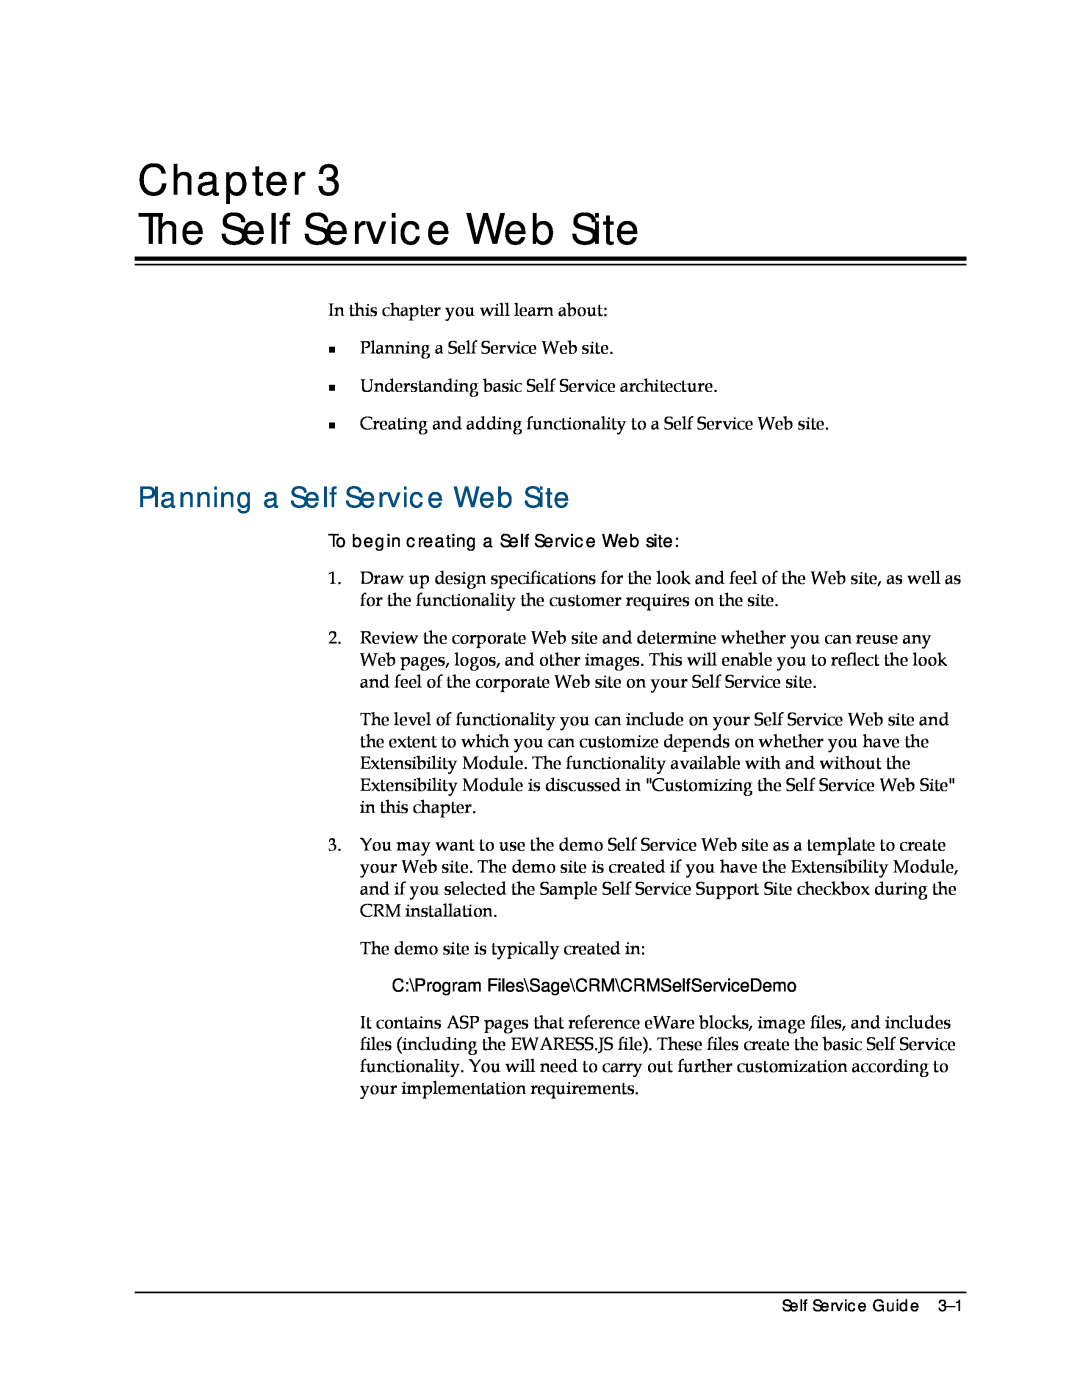 Sage Software 5.8 manual Chapter The Self Service Web Site, Planning a Self Service Web Site 